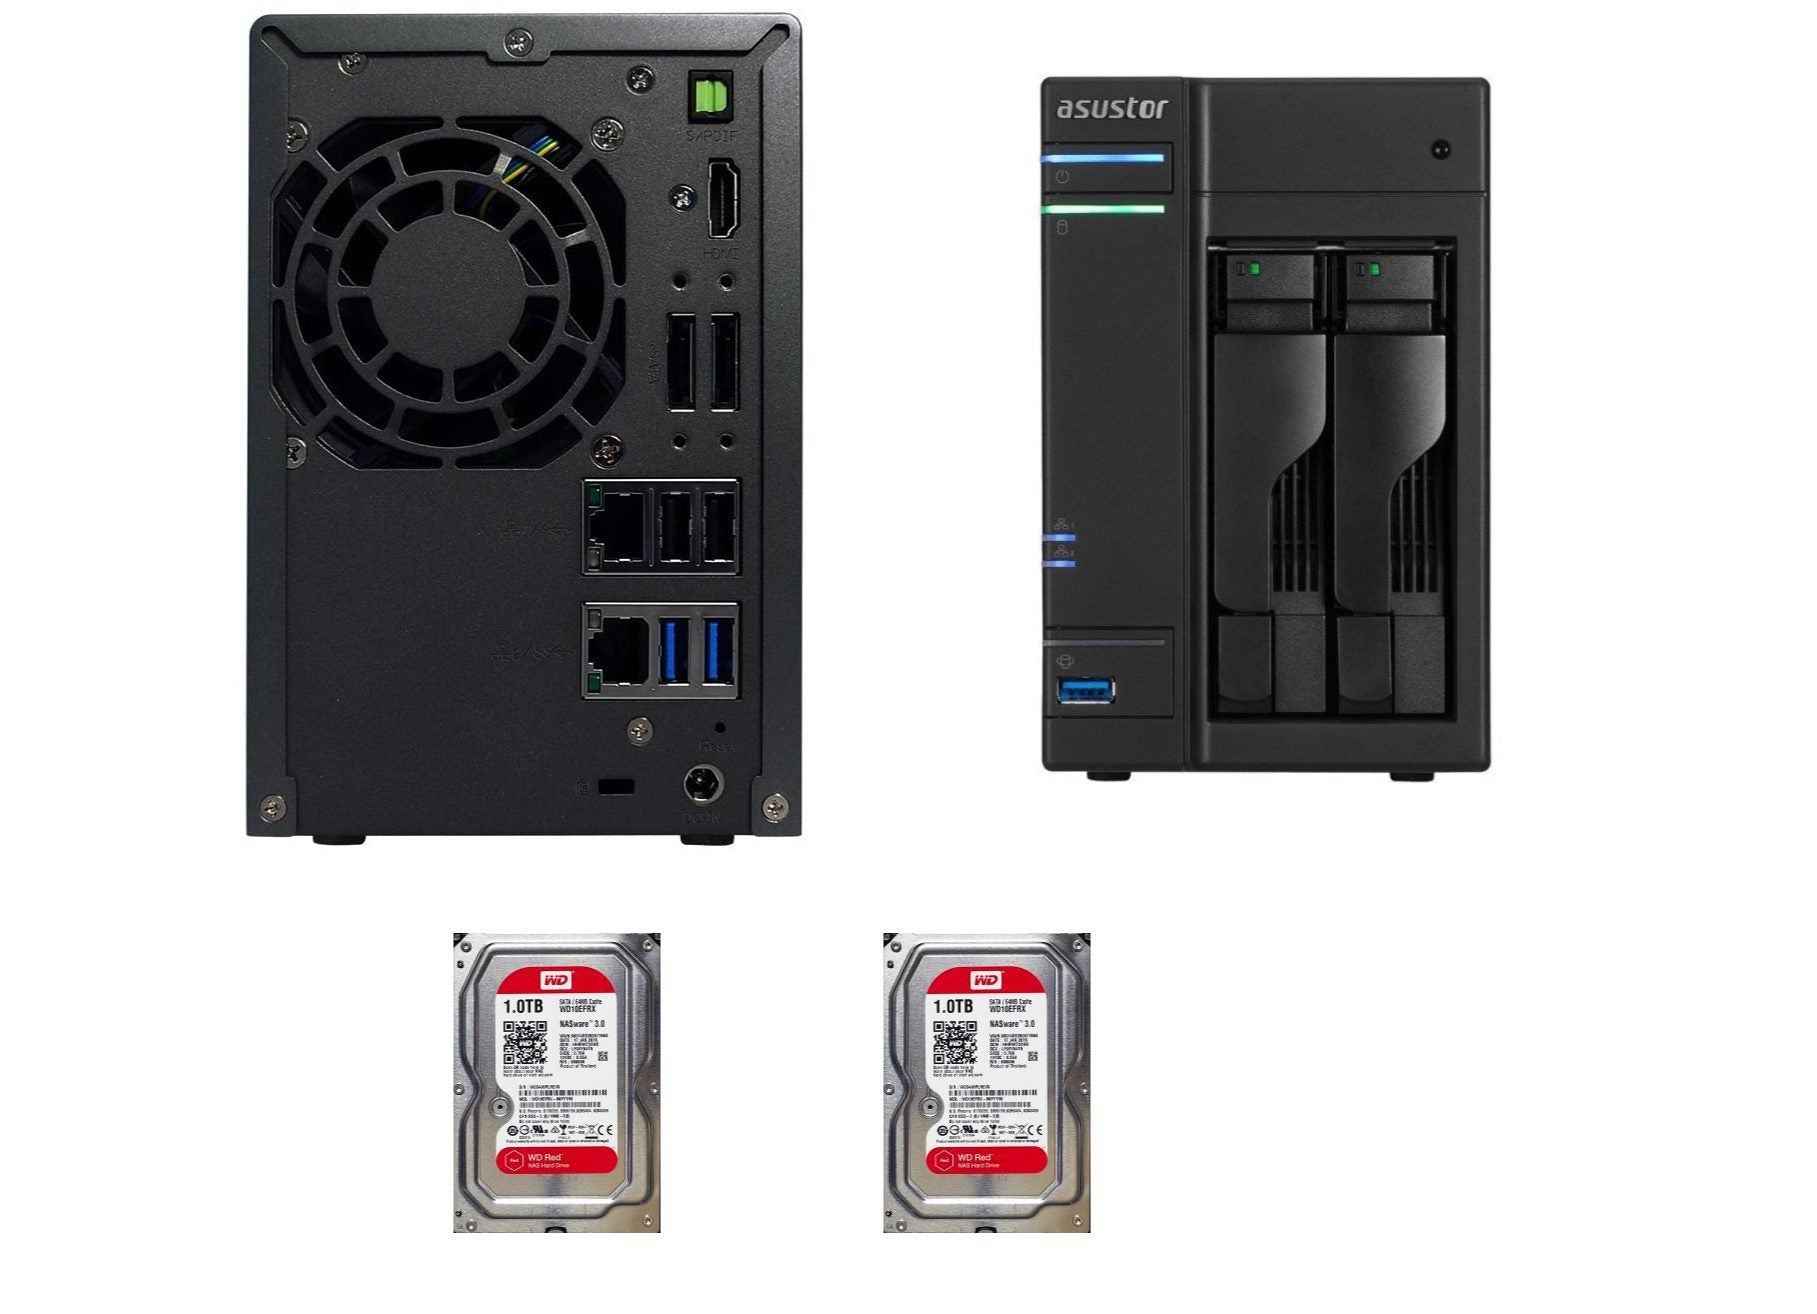 AS6102T NAS COMPLETO DI DUE DISCHI FISSI WD RED WD10EFRX-68FYTN0 NASWARE 3.0